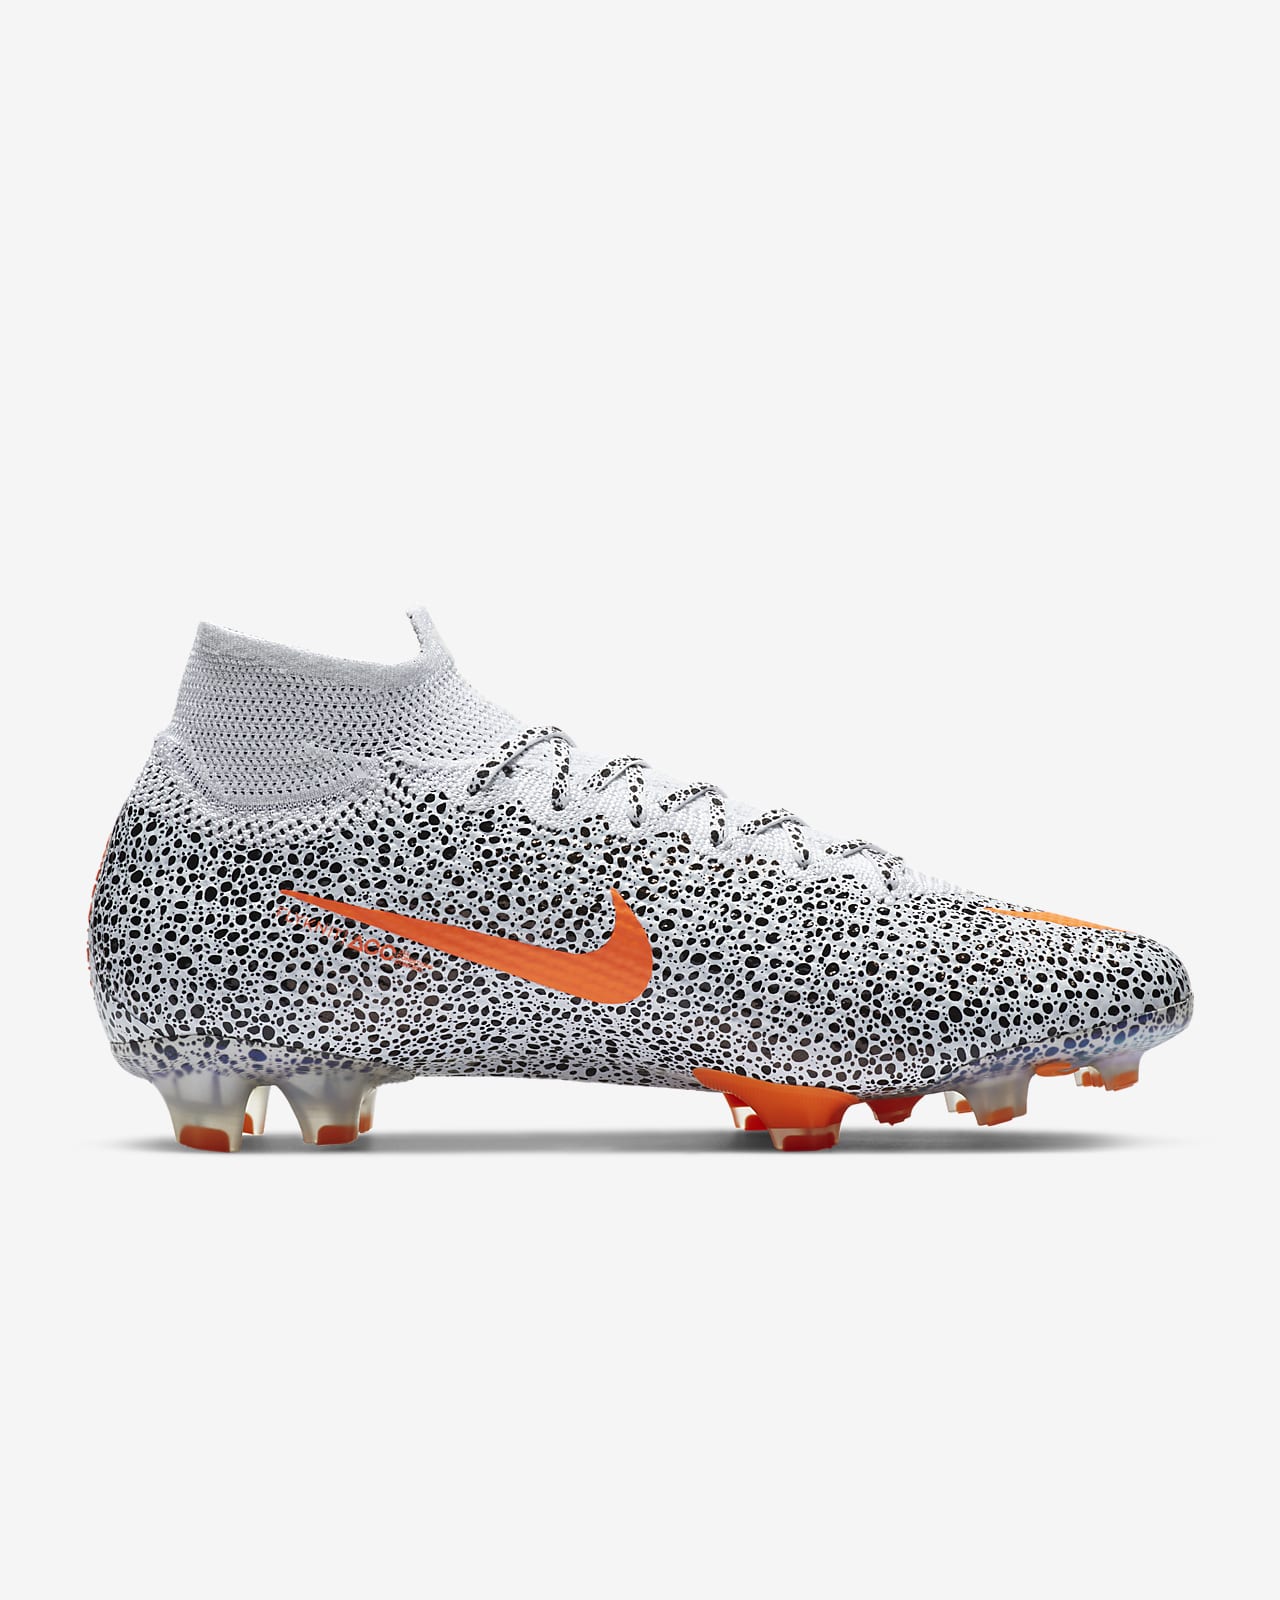 nike superfly elite soccer cleats